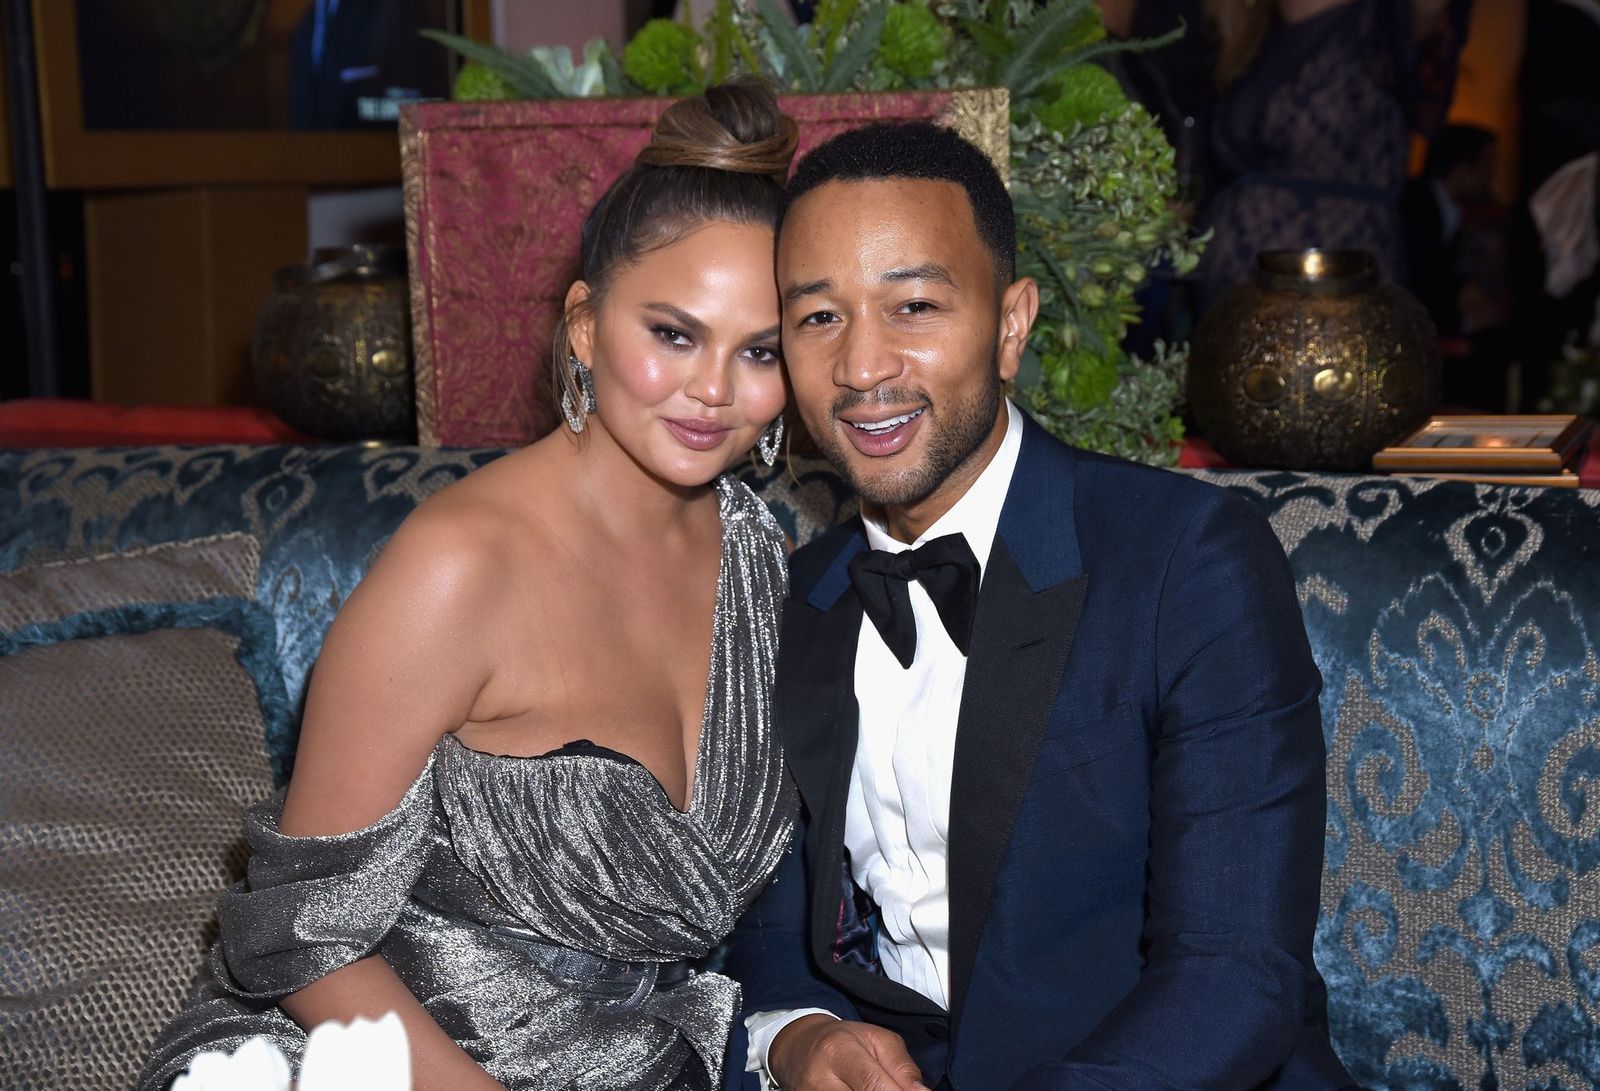 Chrissy Teigen and John Legend at Hulu's Emmy Party at the Nomad Hotel Los Angeles on September 17, 2018, in California | Photo: Presley Ann/Getty Images